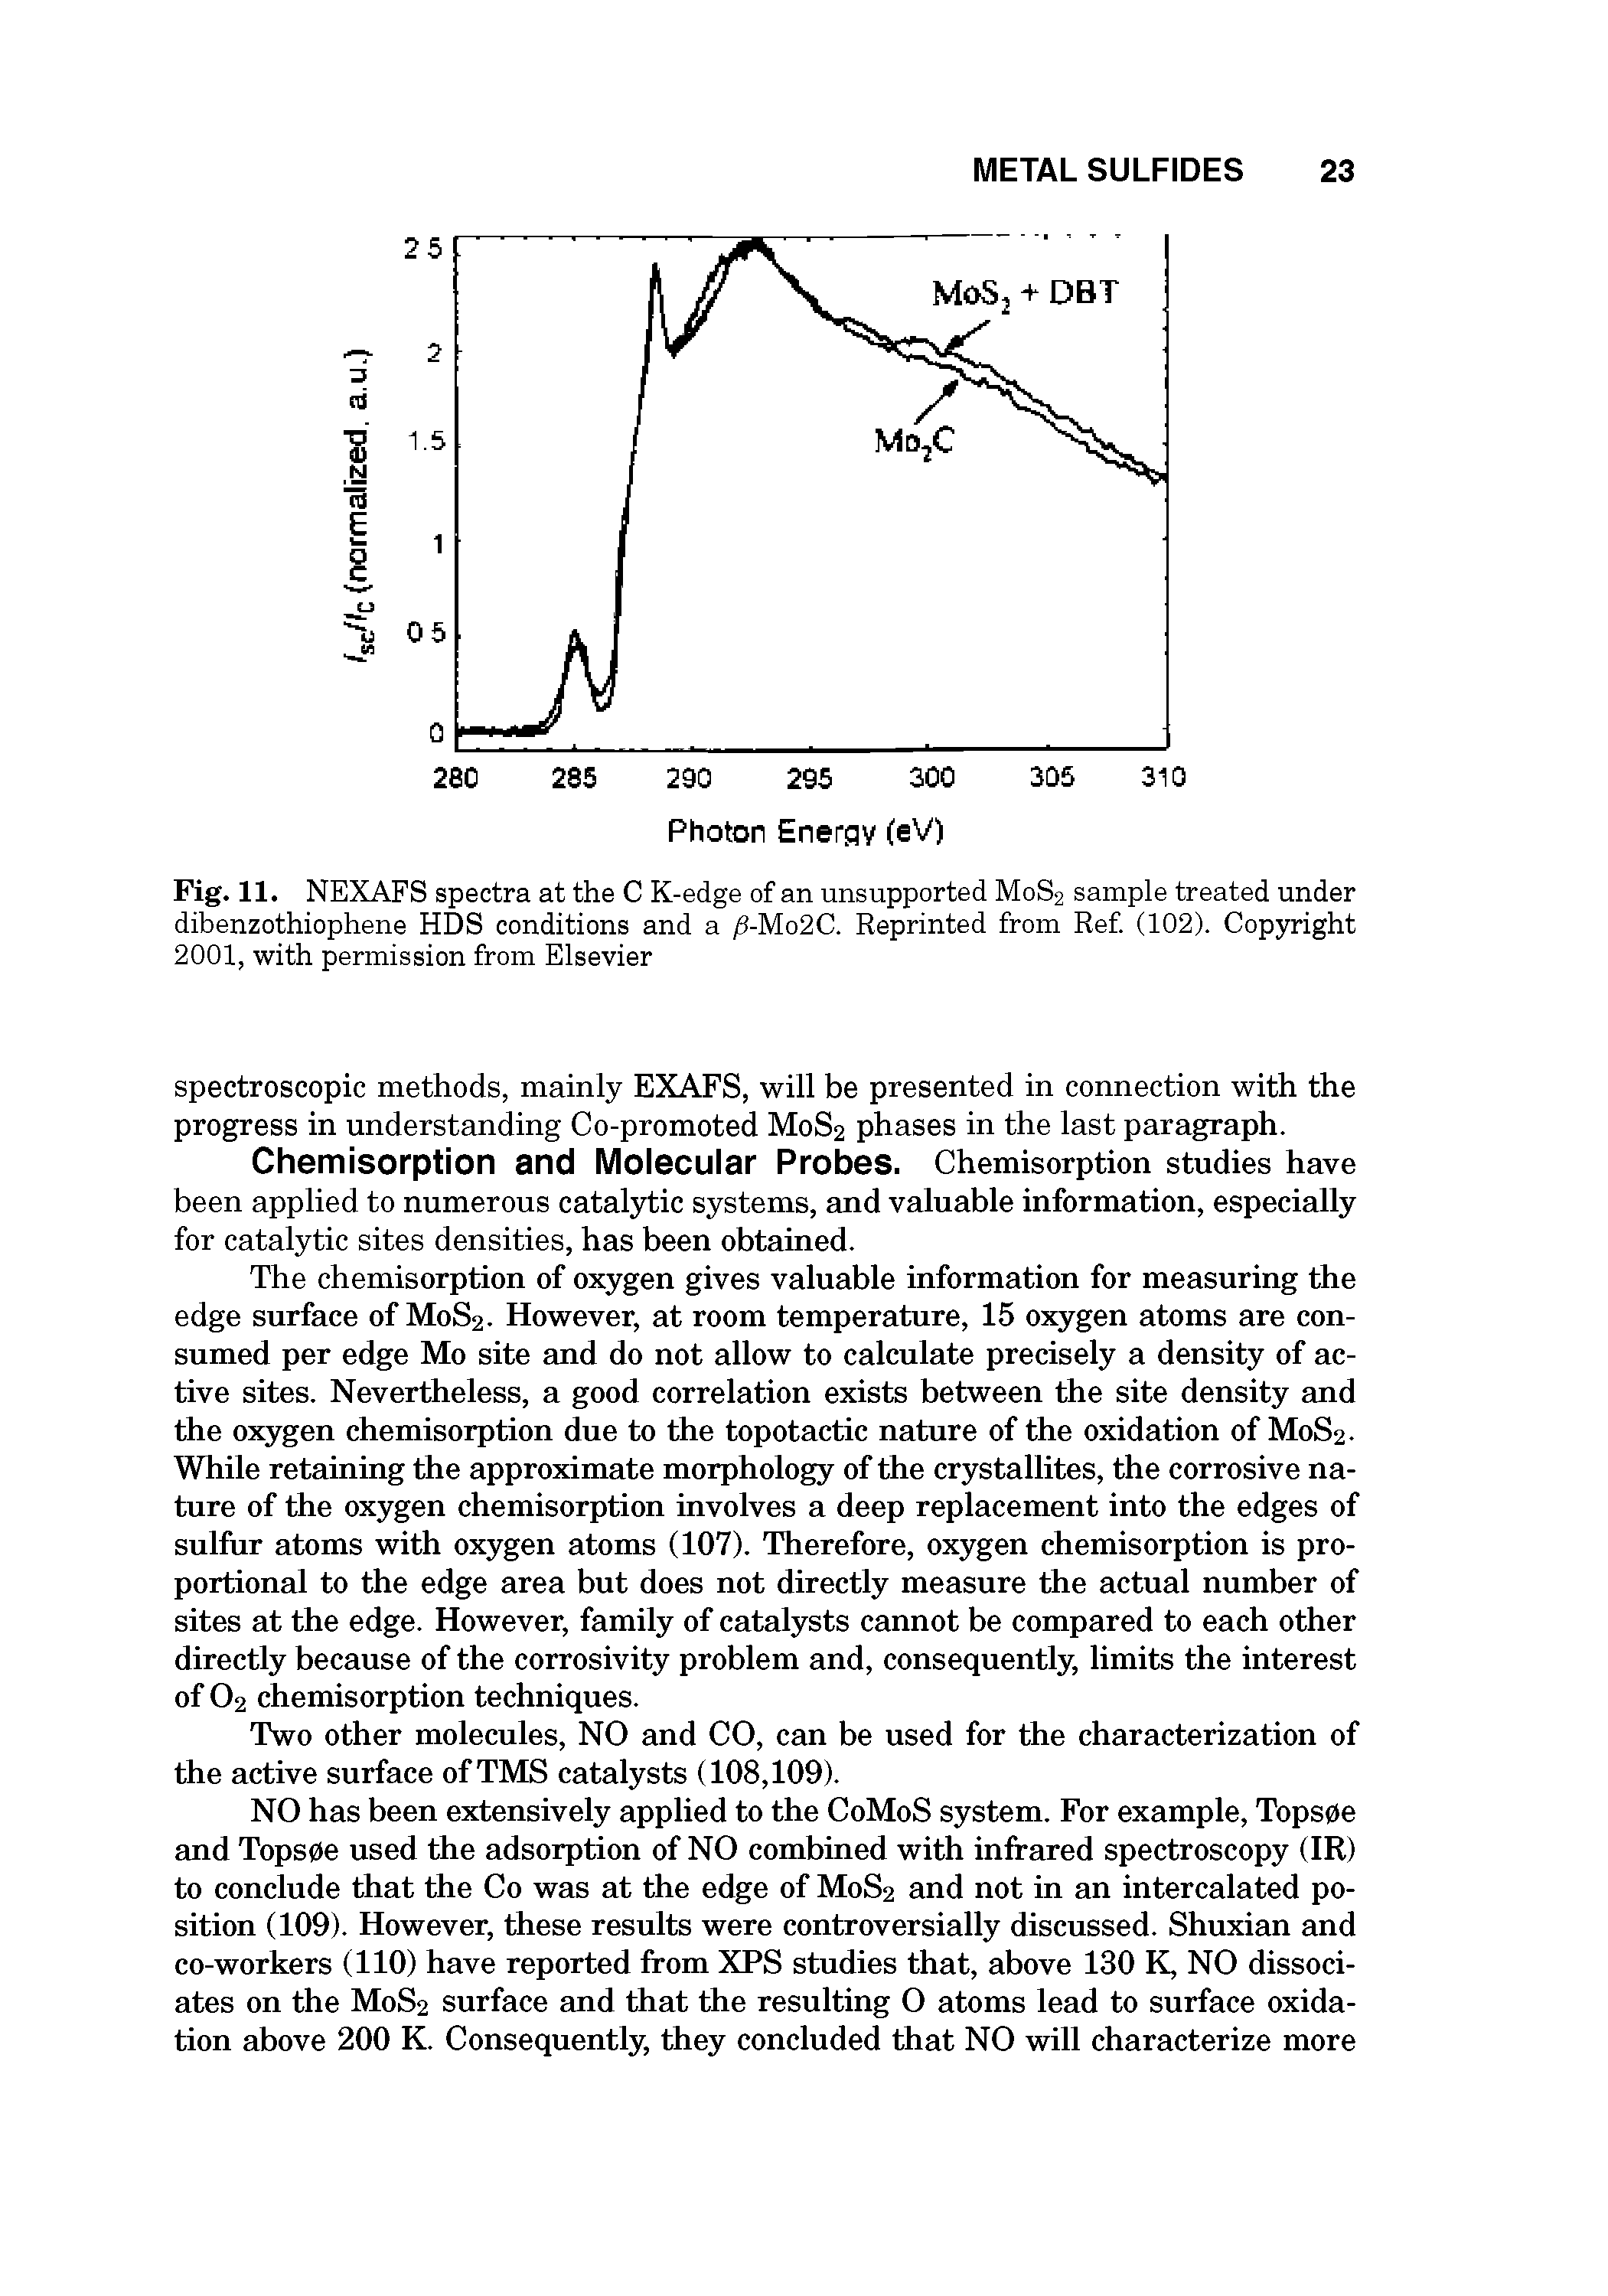 Fig. 11. NEXAFS spectra at the C K-edge of an unsupported M0S2 sample treated under dibenzothiophene HDS conditions and a /S-Mo2C. Reprinted from Ref. (102). Copyright 2001, with permission from Elsevier...